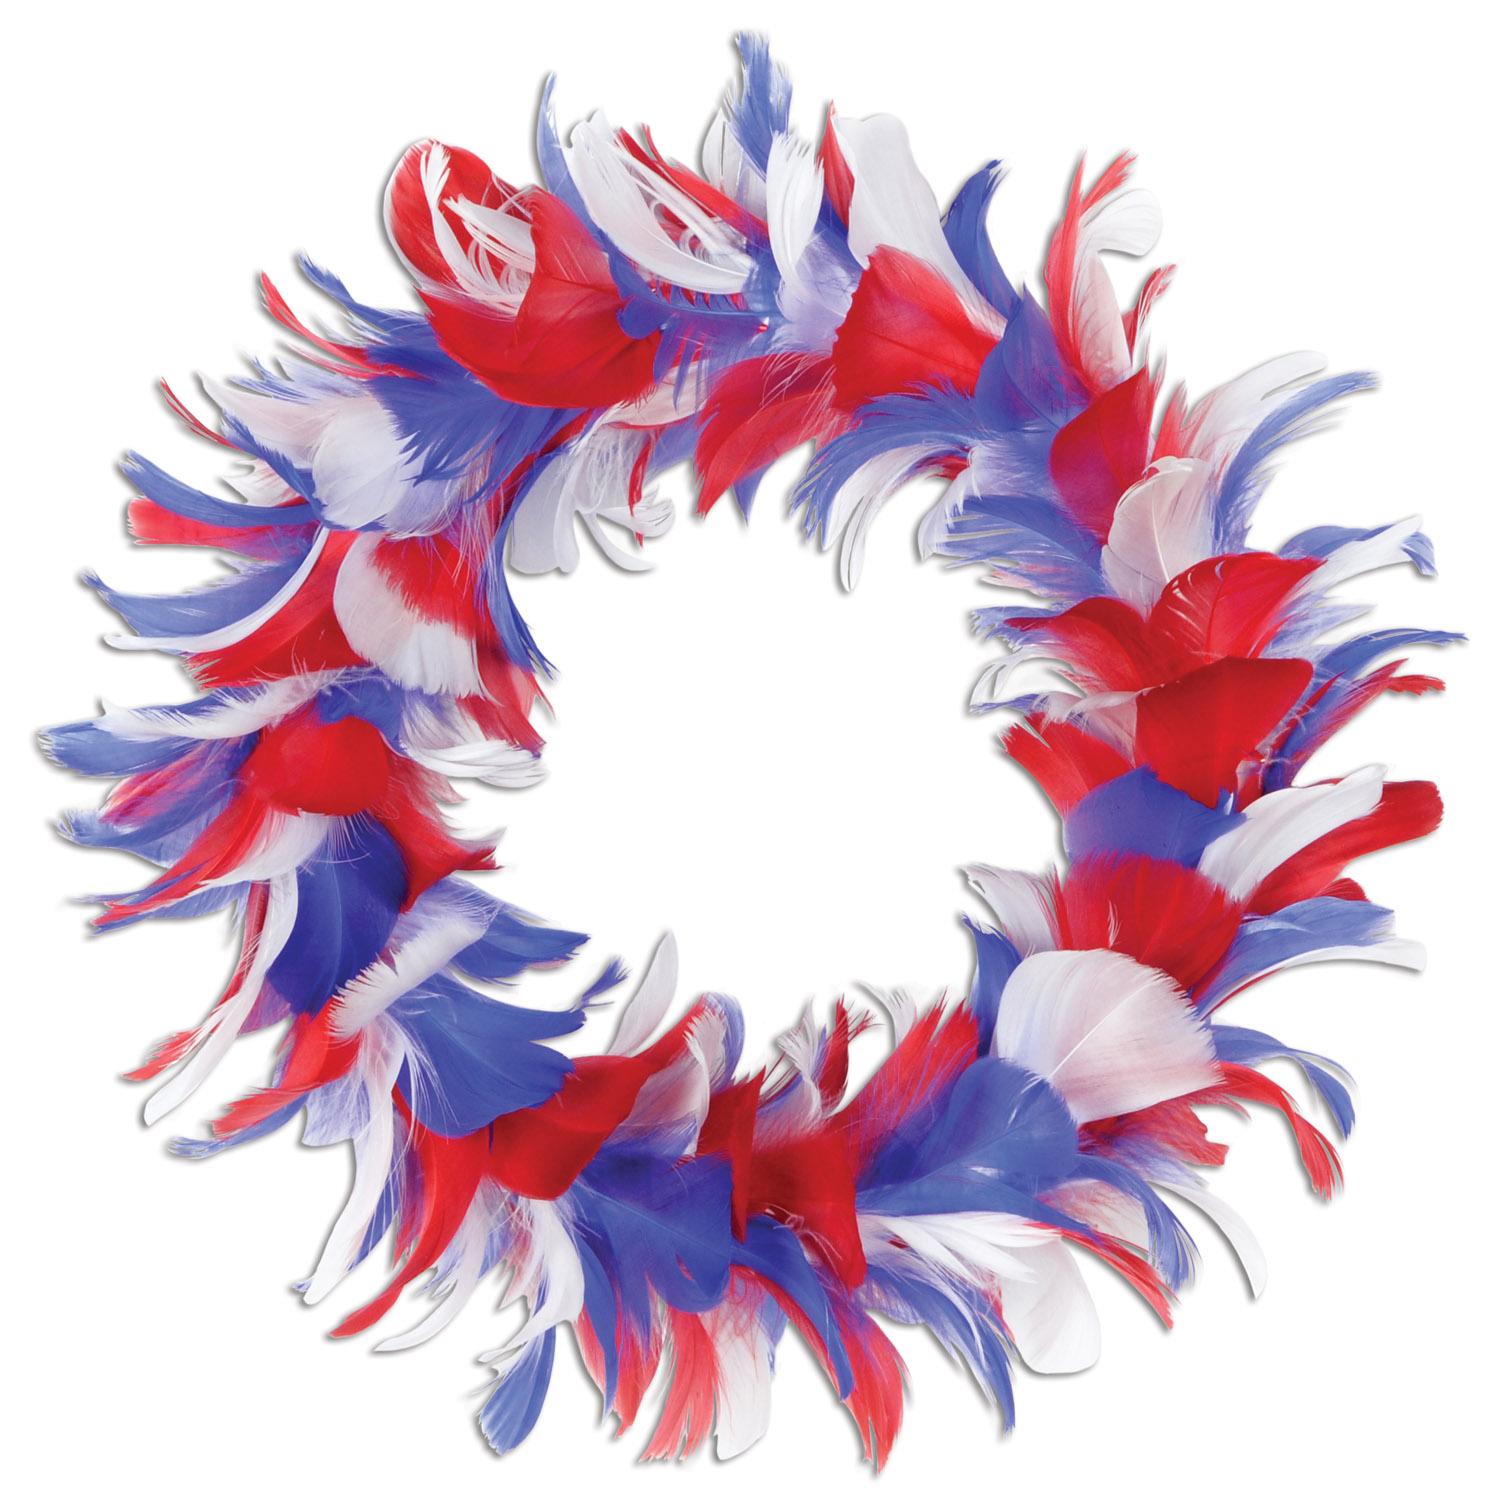 Beistle Fancy Party Wreath - red - white - blue